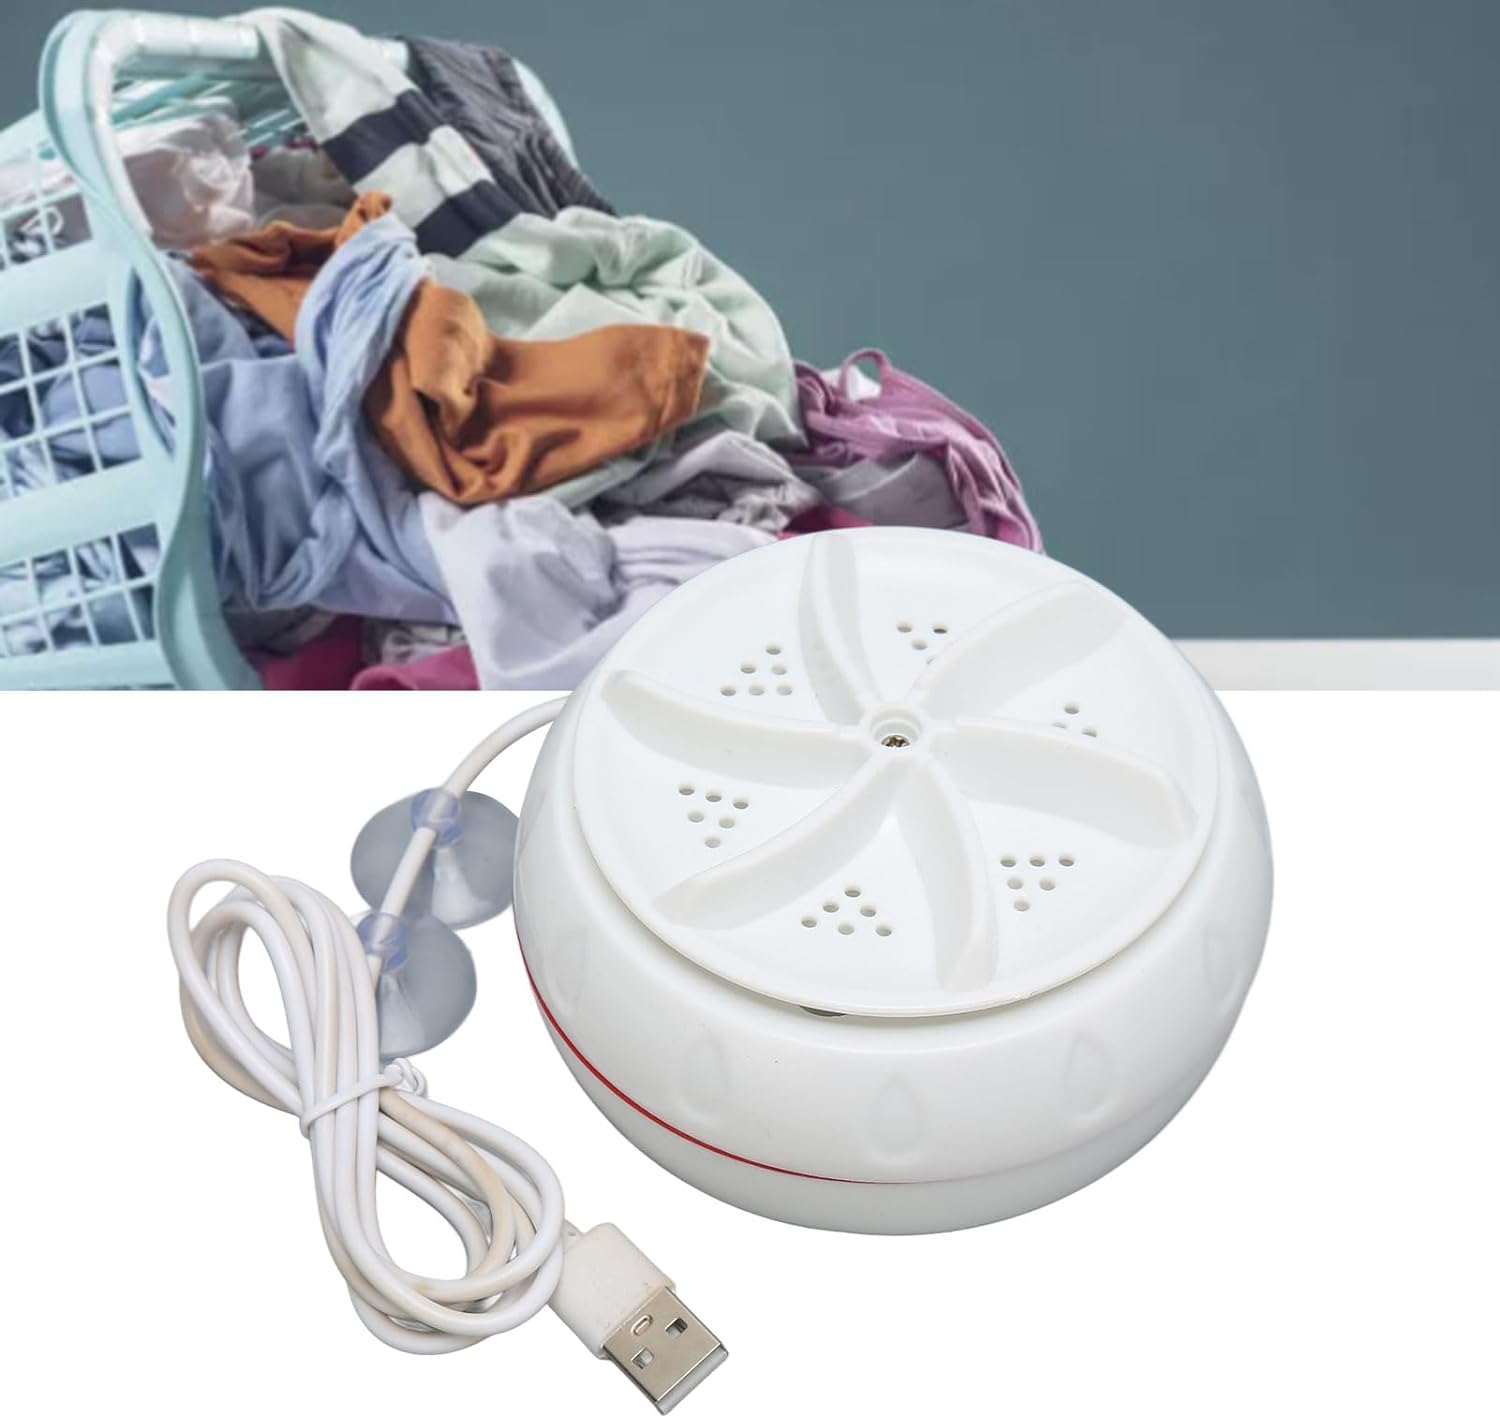 USB Turbo Washer: Portable for Home, Camping, College